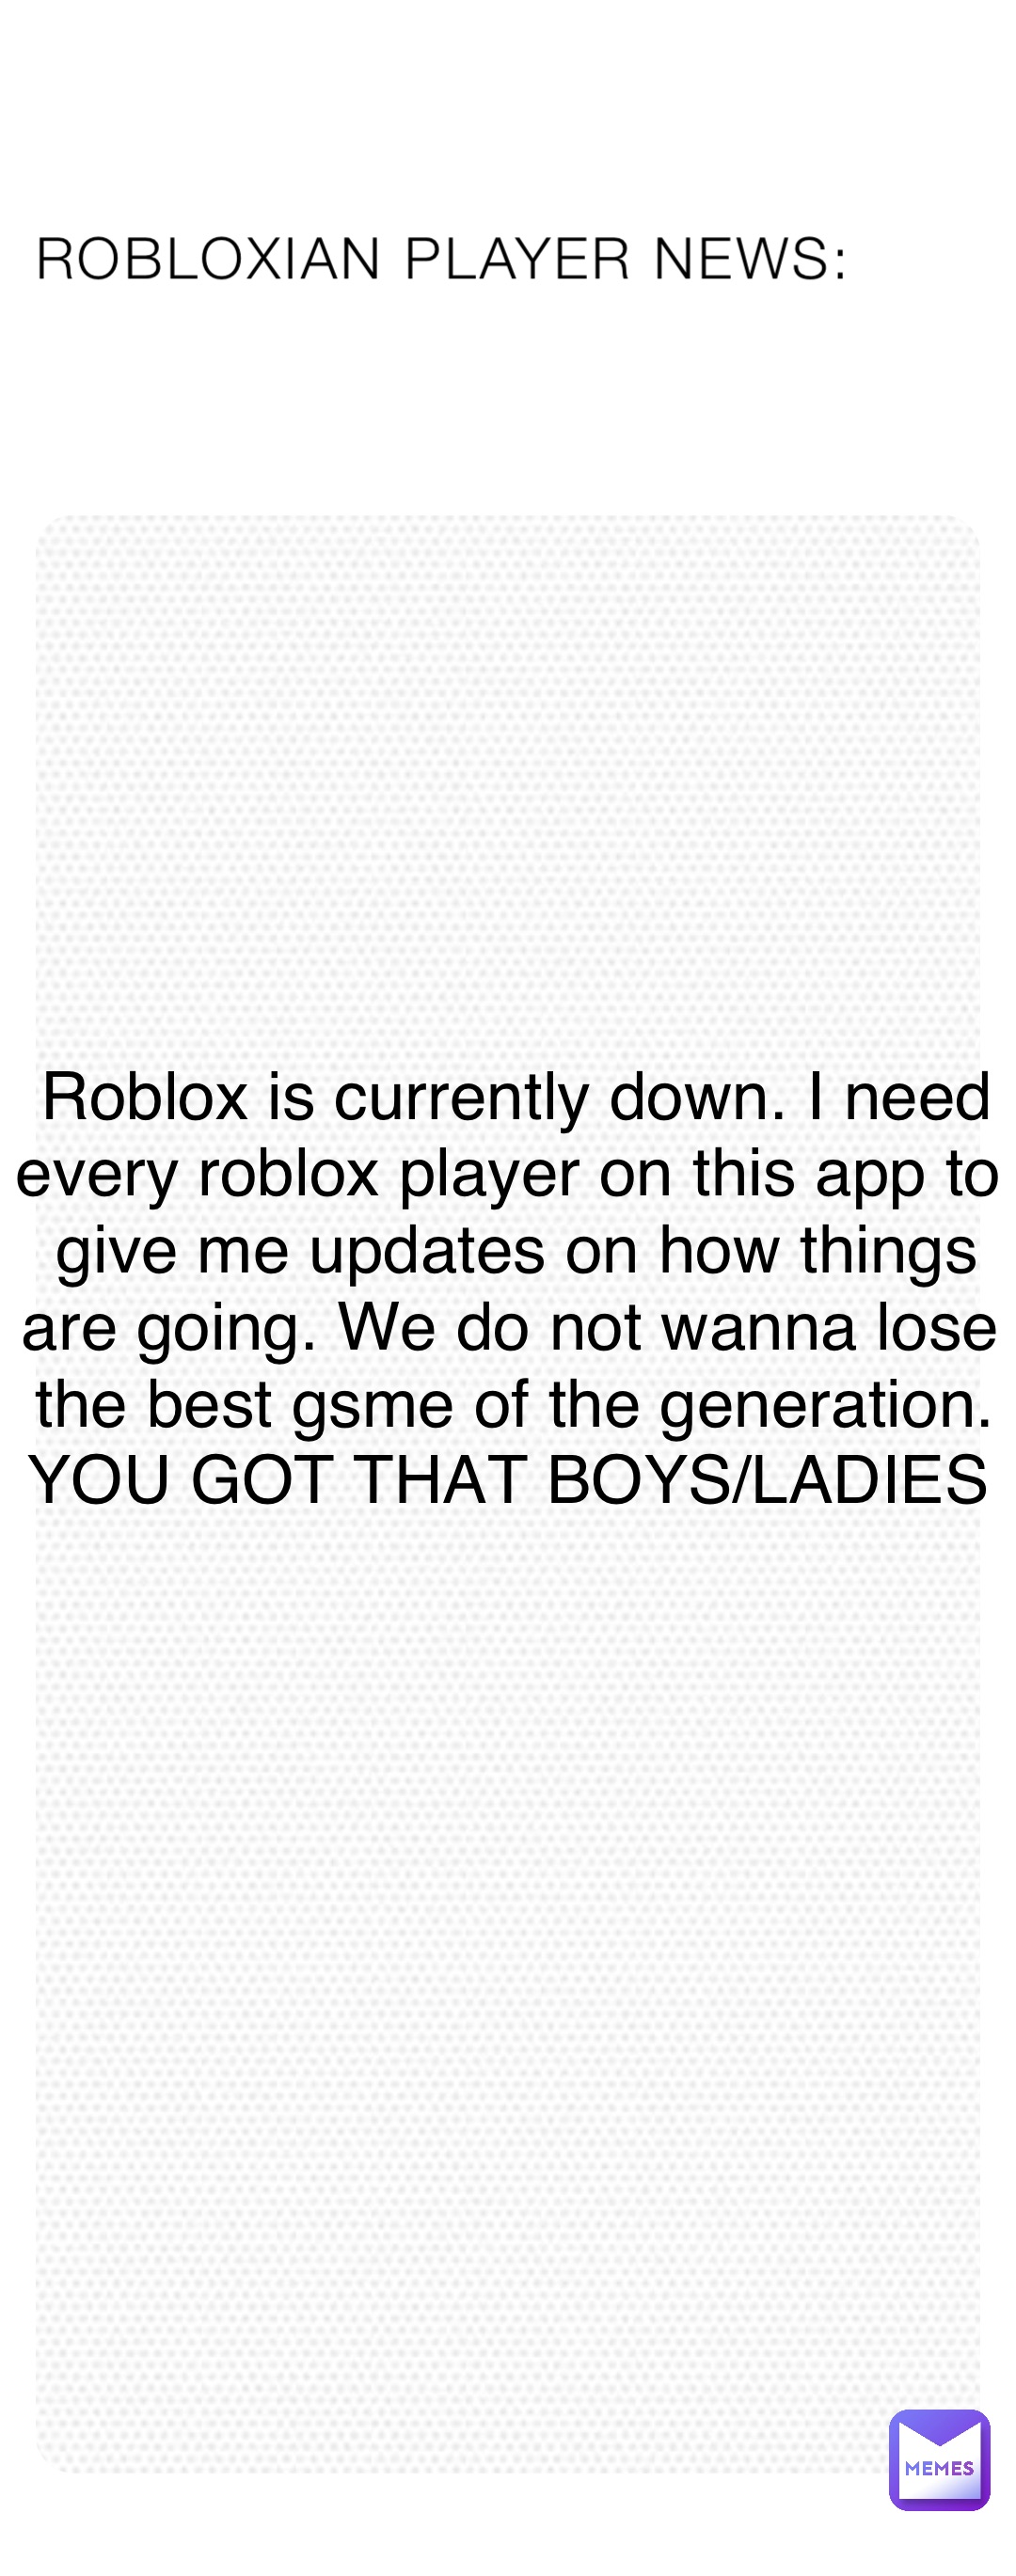 ROBLOXIAN PLAYER NEWS: Roblox is currently down. I need every roblox player on this app to give me updates on how things are going. We do not wanna lose the best gsme of the generation. YOU GOT THAT BOYS/LADIES